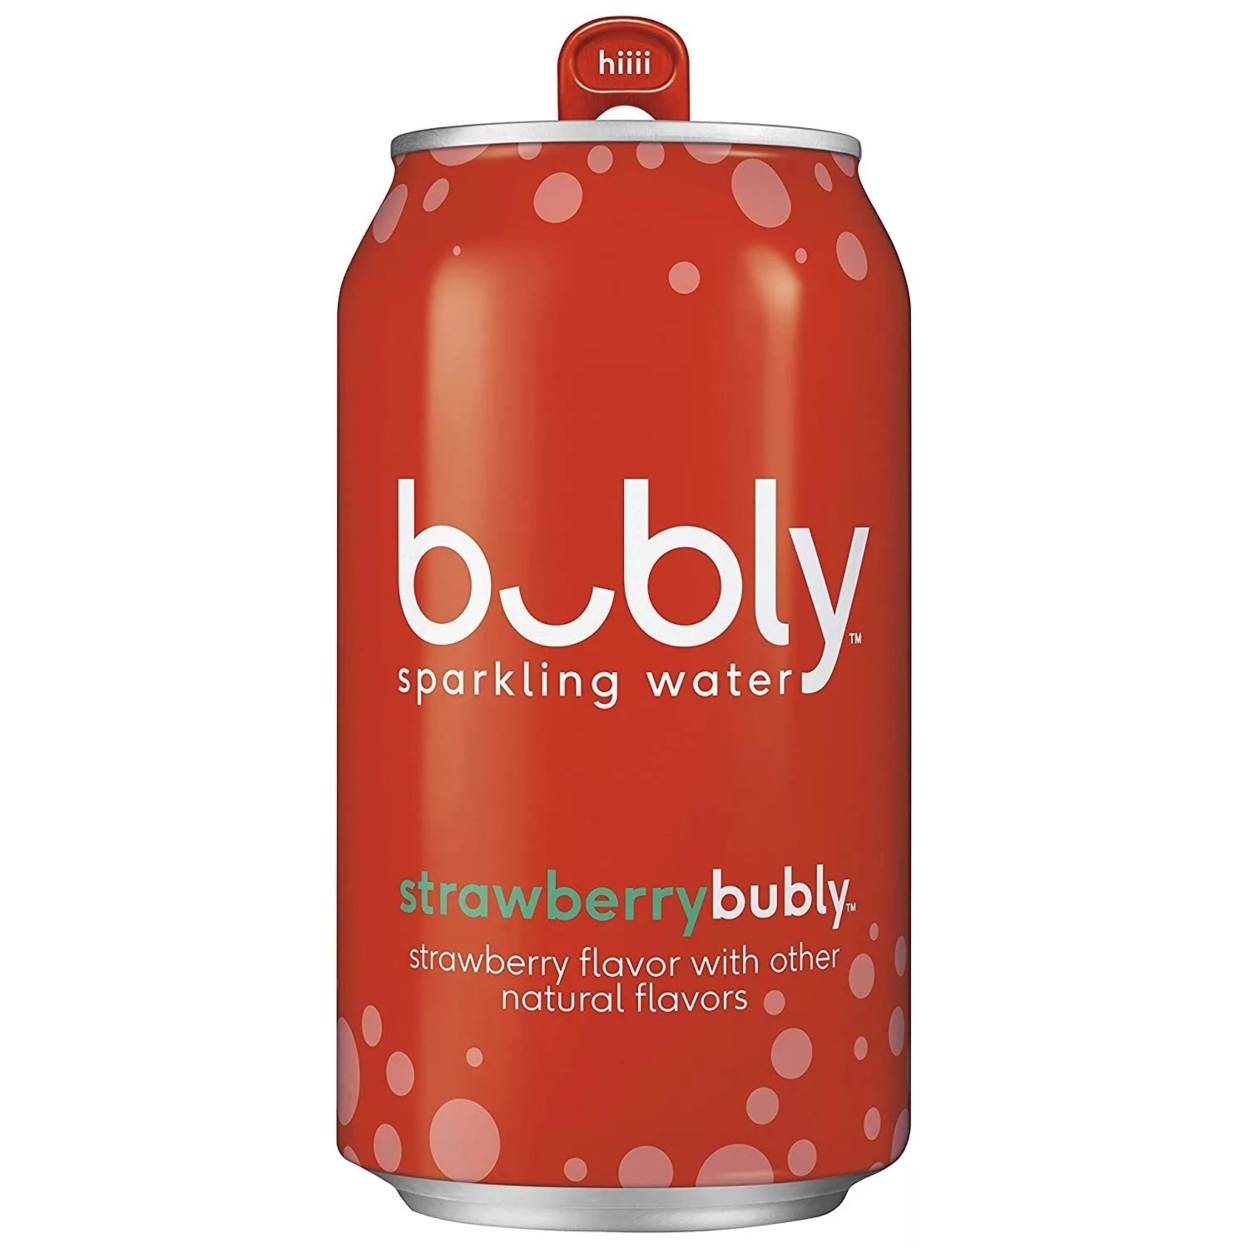 Bubly Berry Sparkling Water Variety Pack, 12 Fluid Ounce (24 Count)